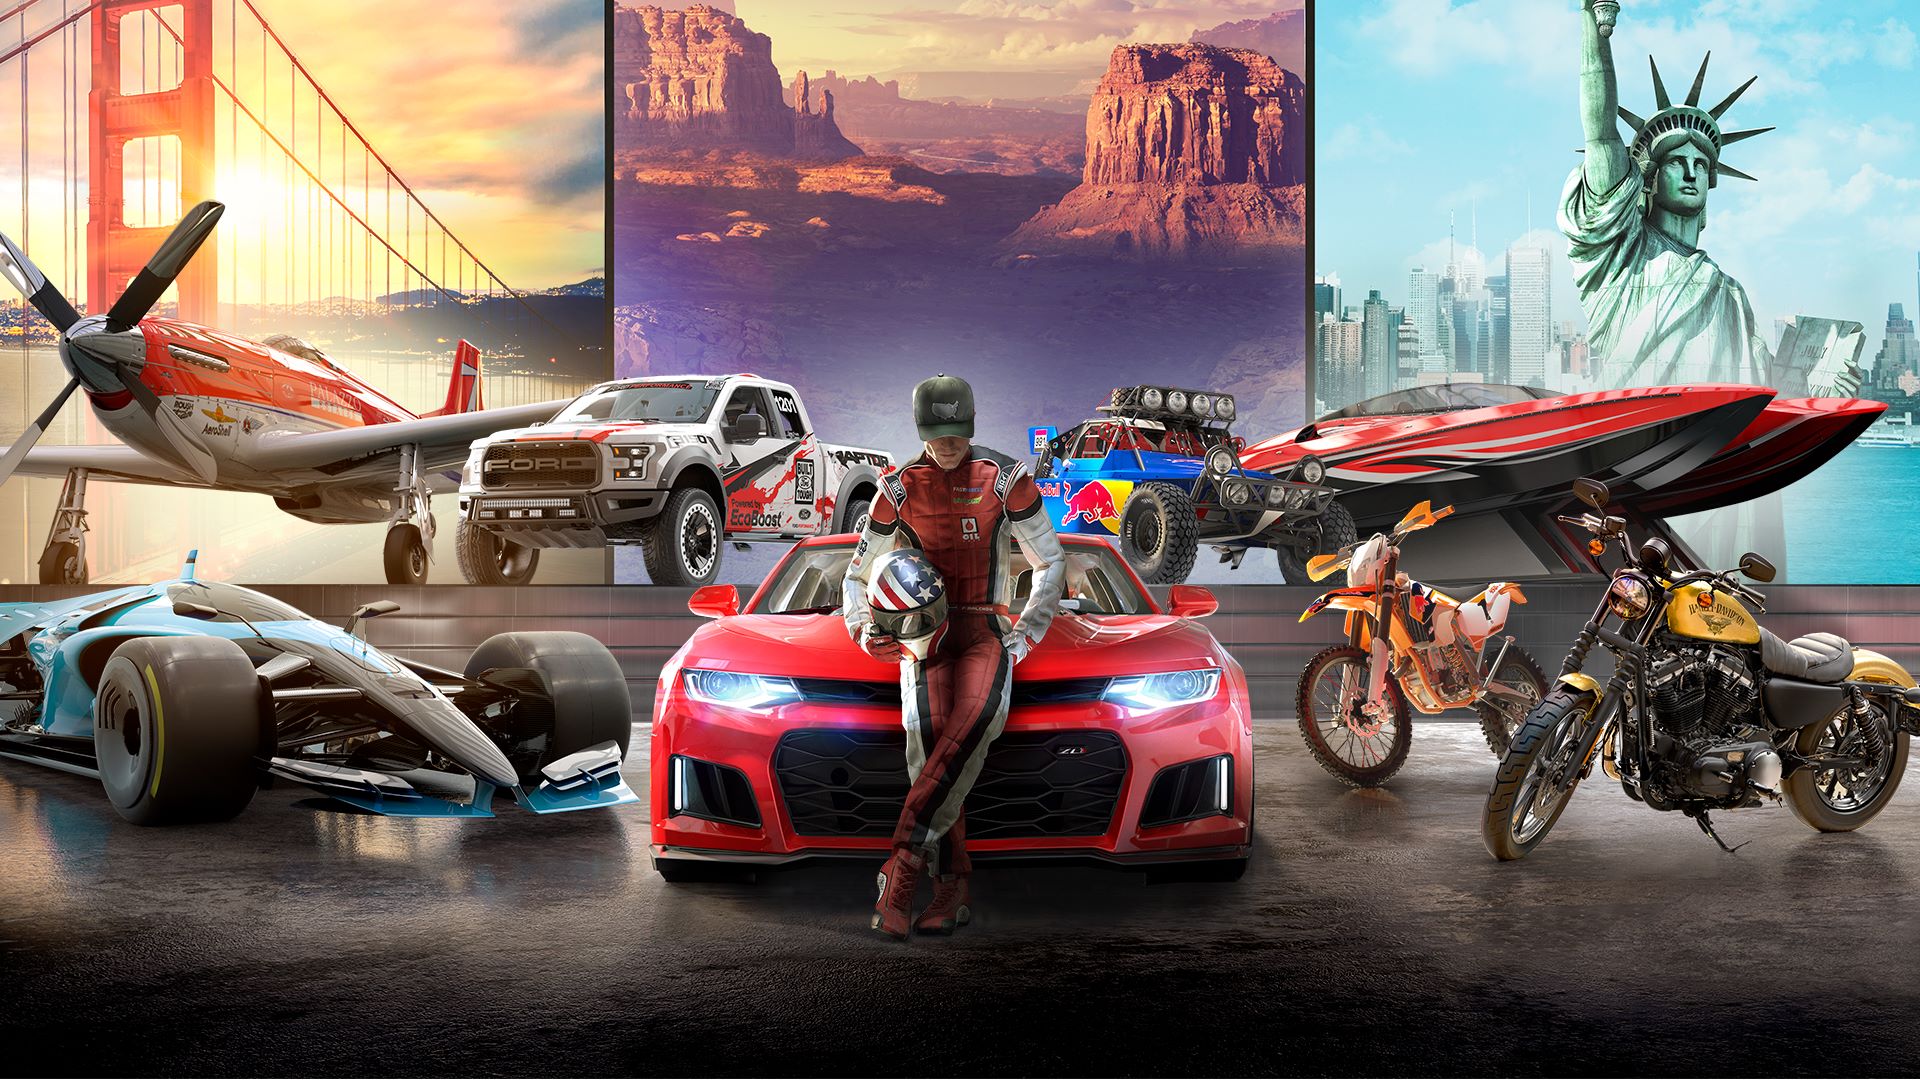 With The Crew Motorfest, Ubisoft finally brings the thrill of